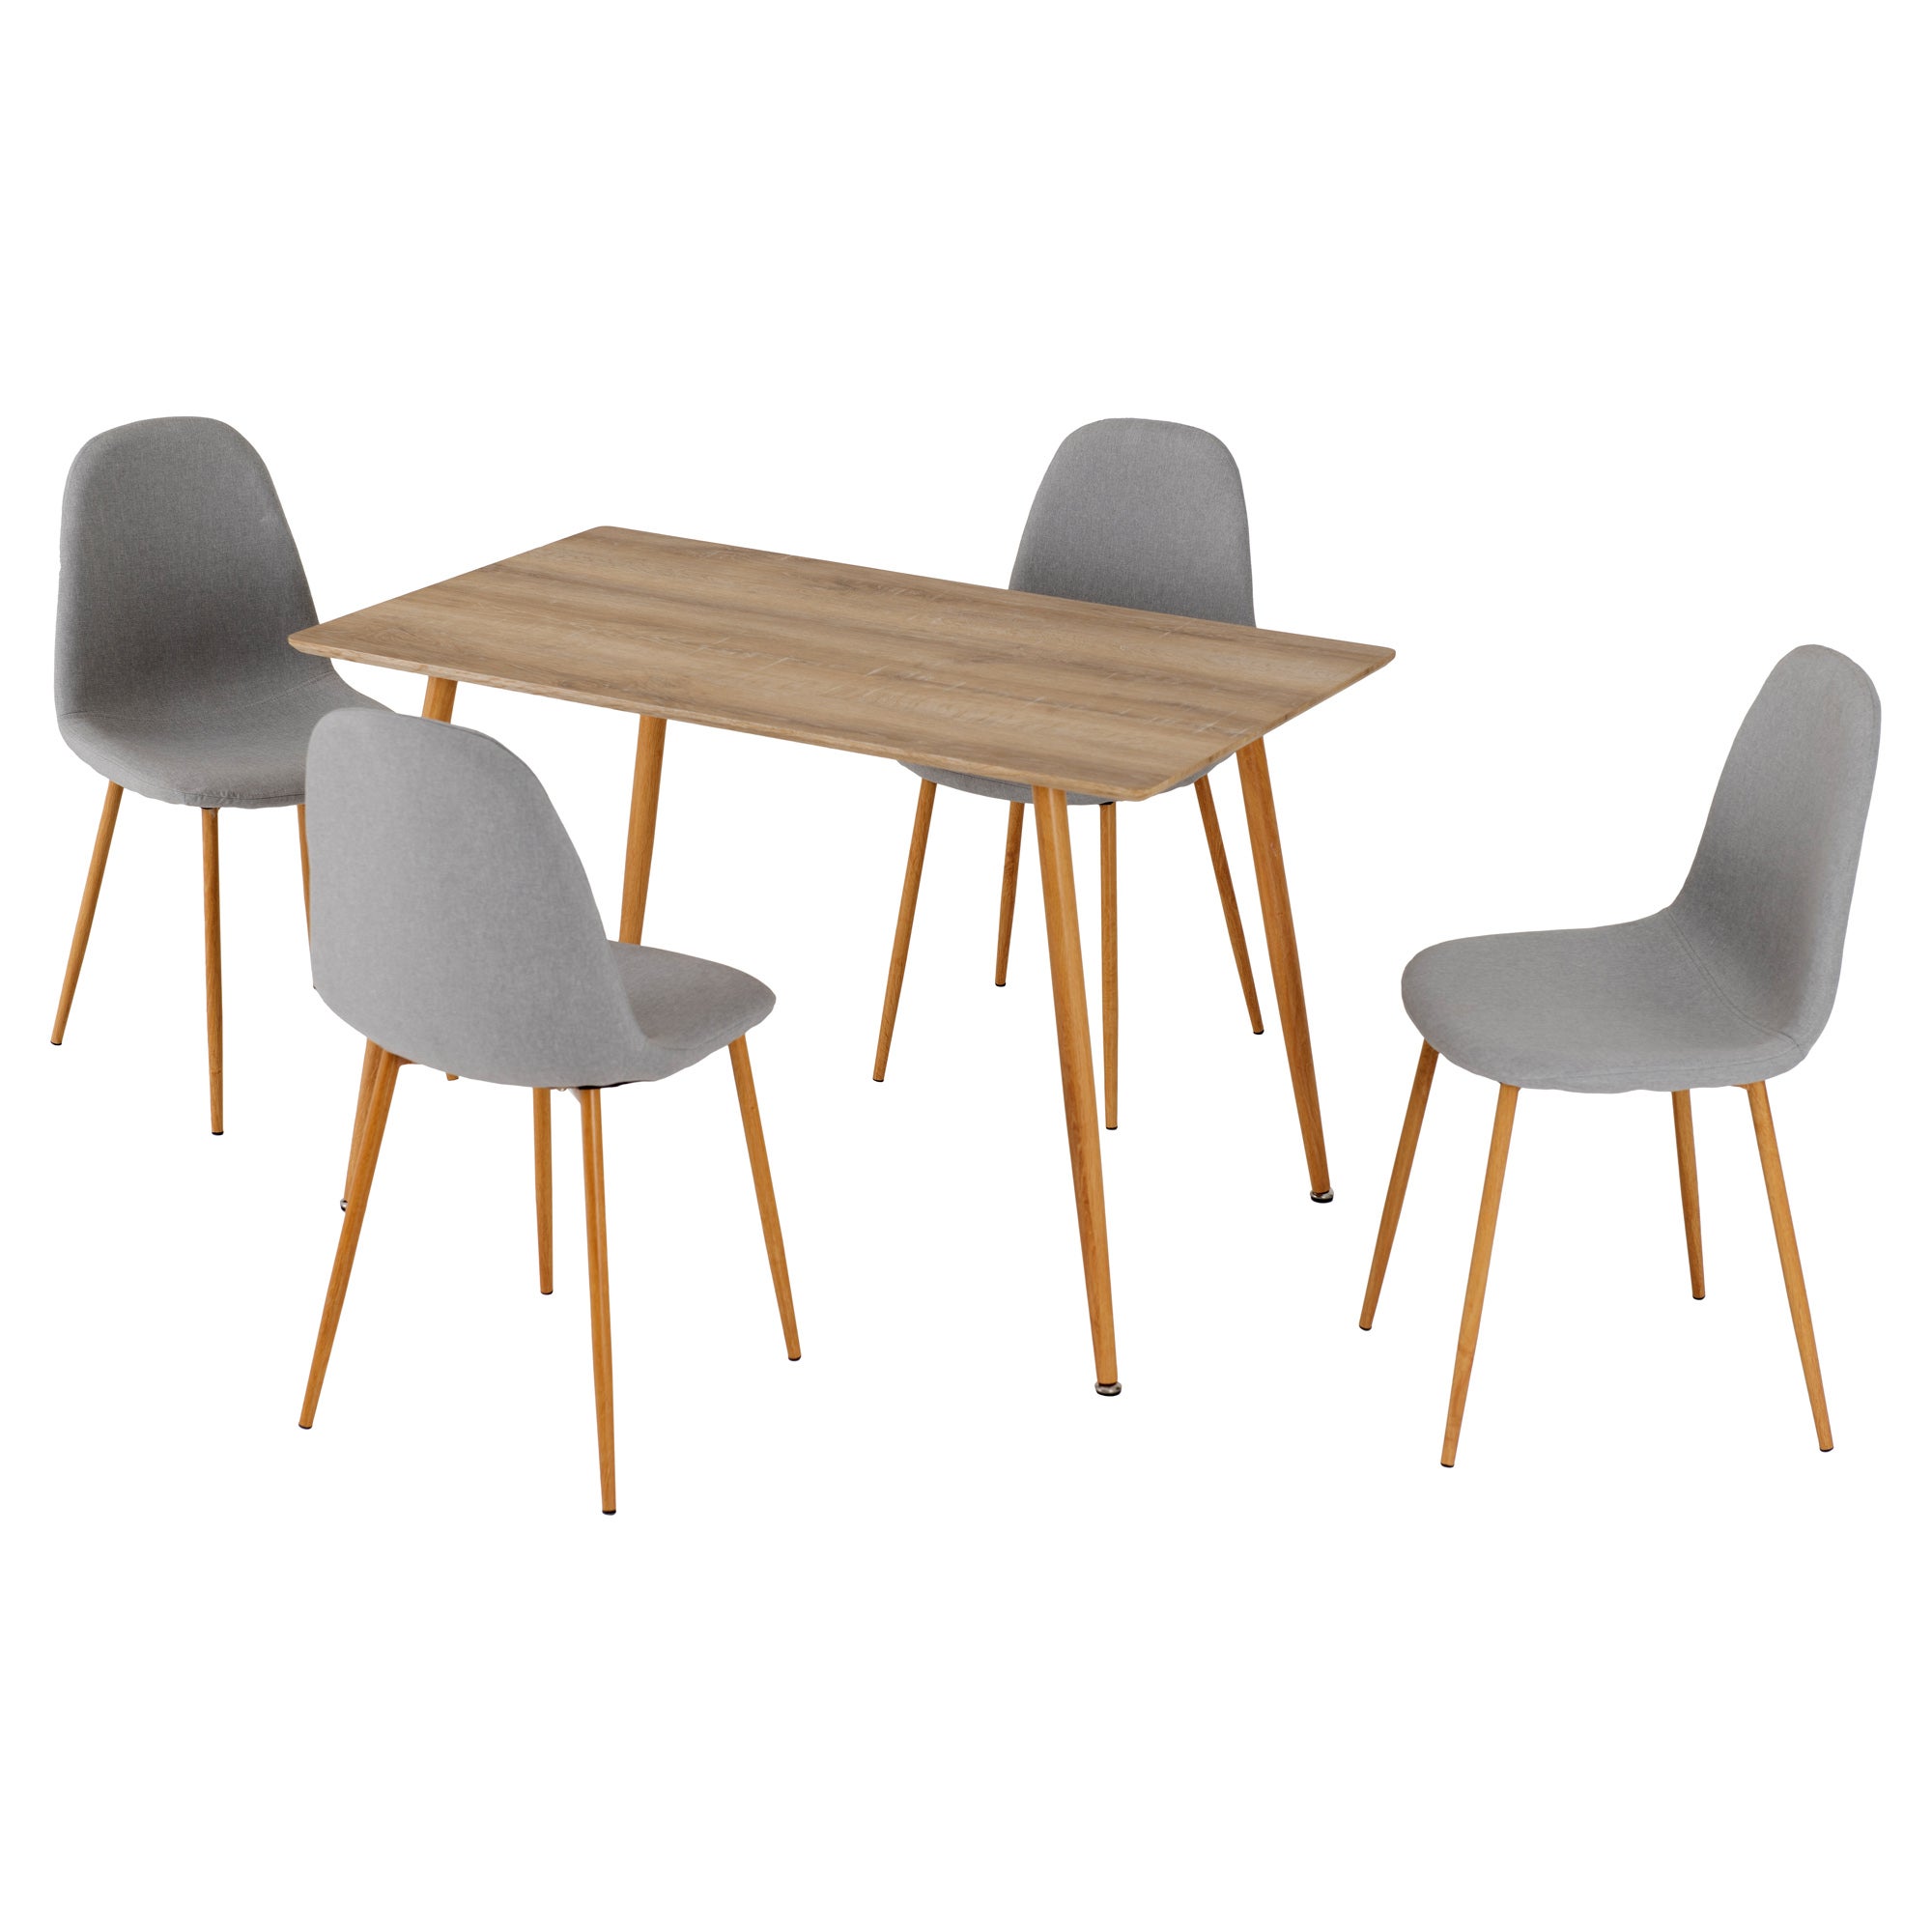 Barley Rectangular Dining Table With 4 Chairs Grey Brown